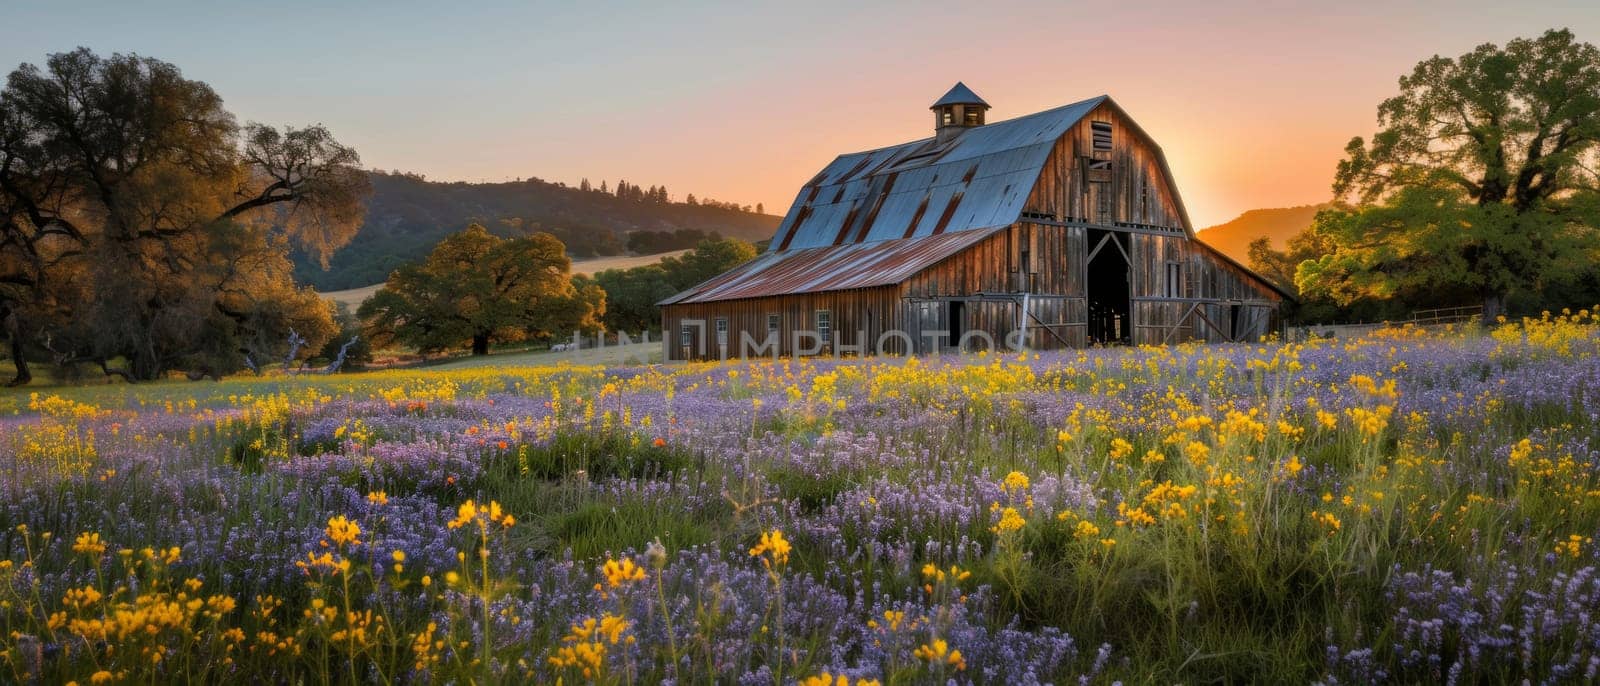 The sun casts a golden hue over a field of wildflowers leading to an old, rustic barn, embodying the essence of tranquil country life at sunset.